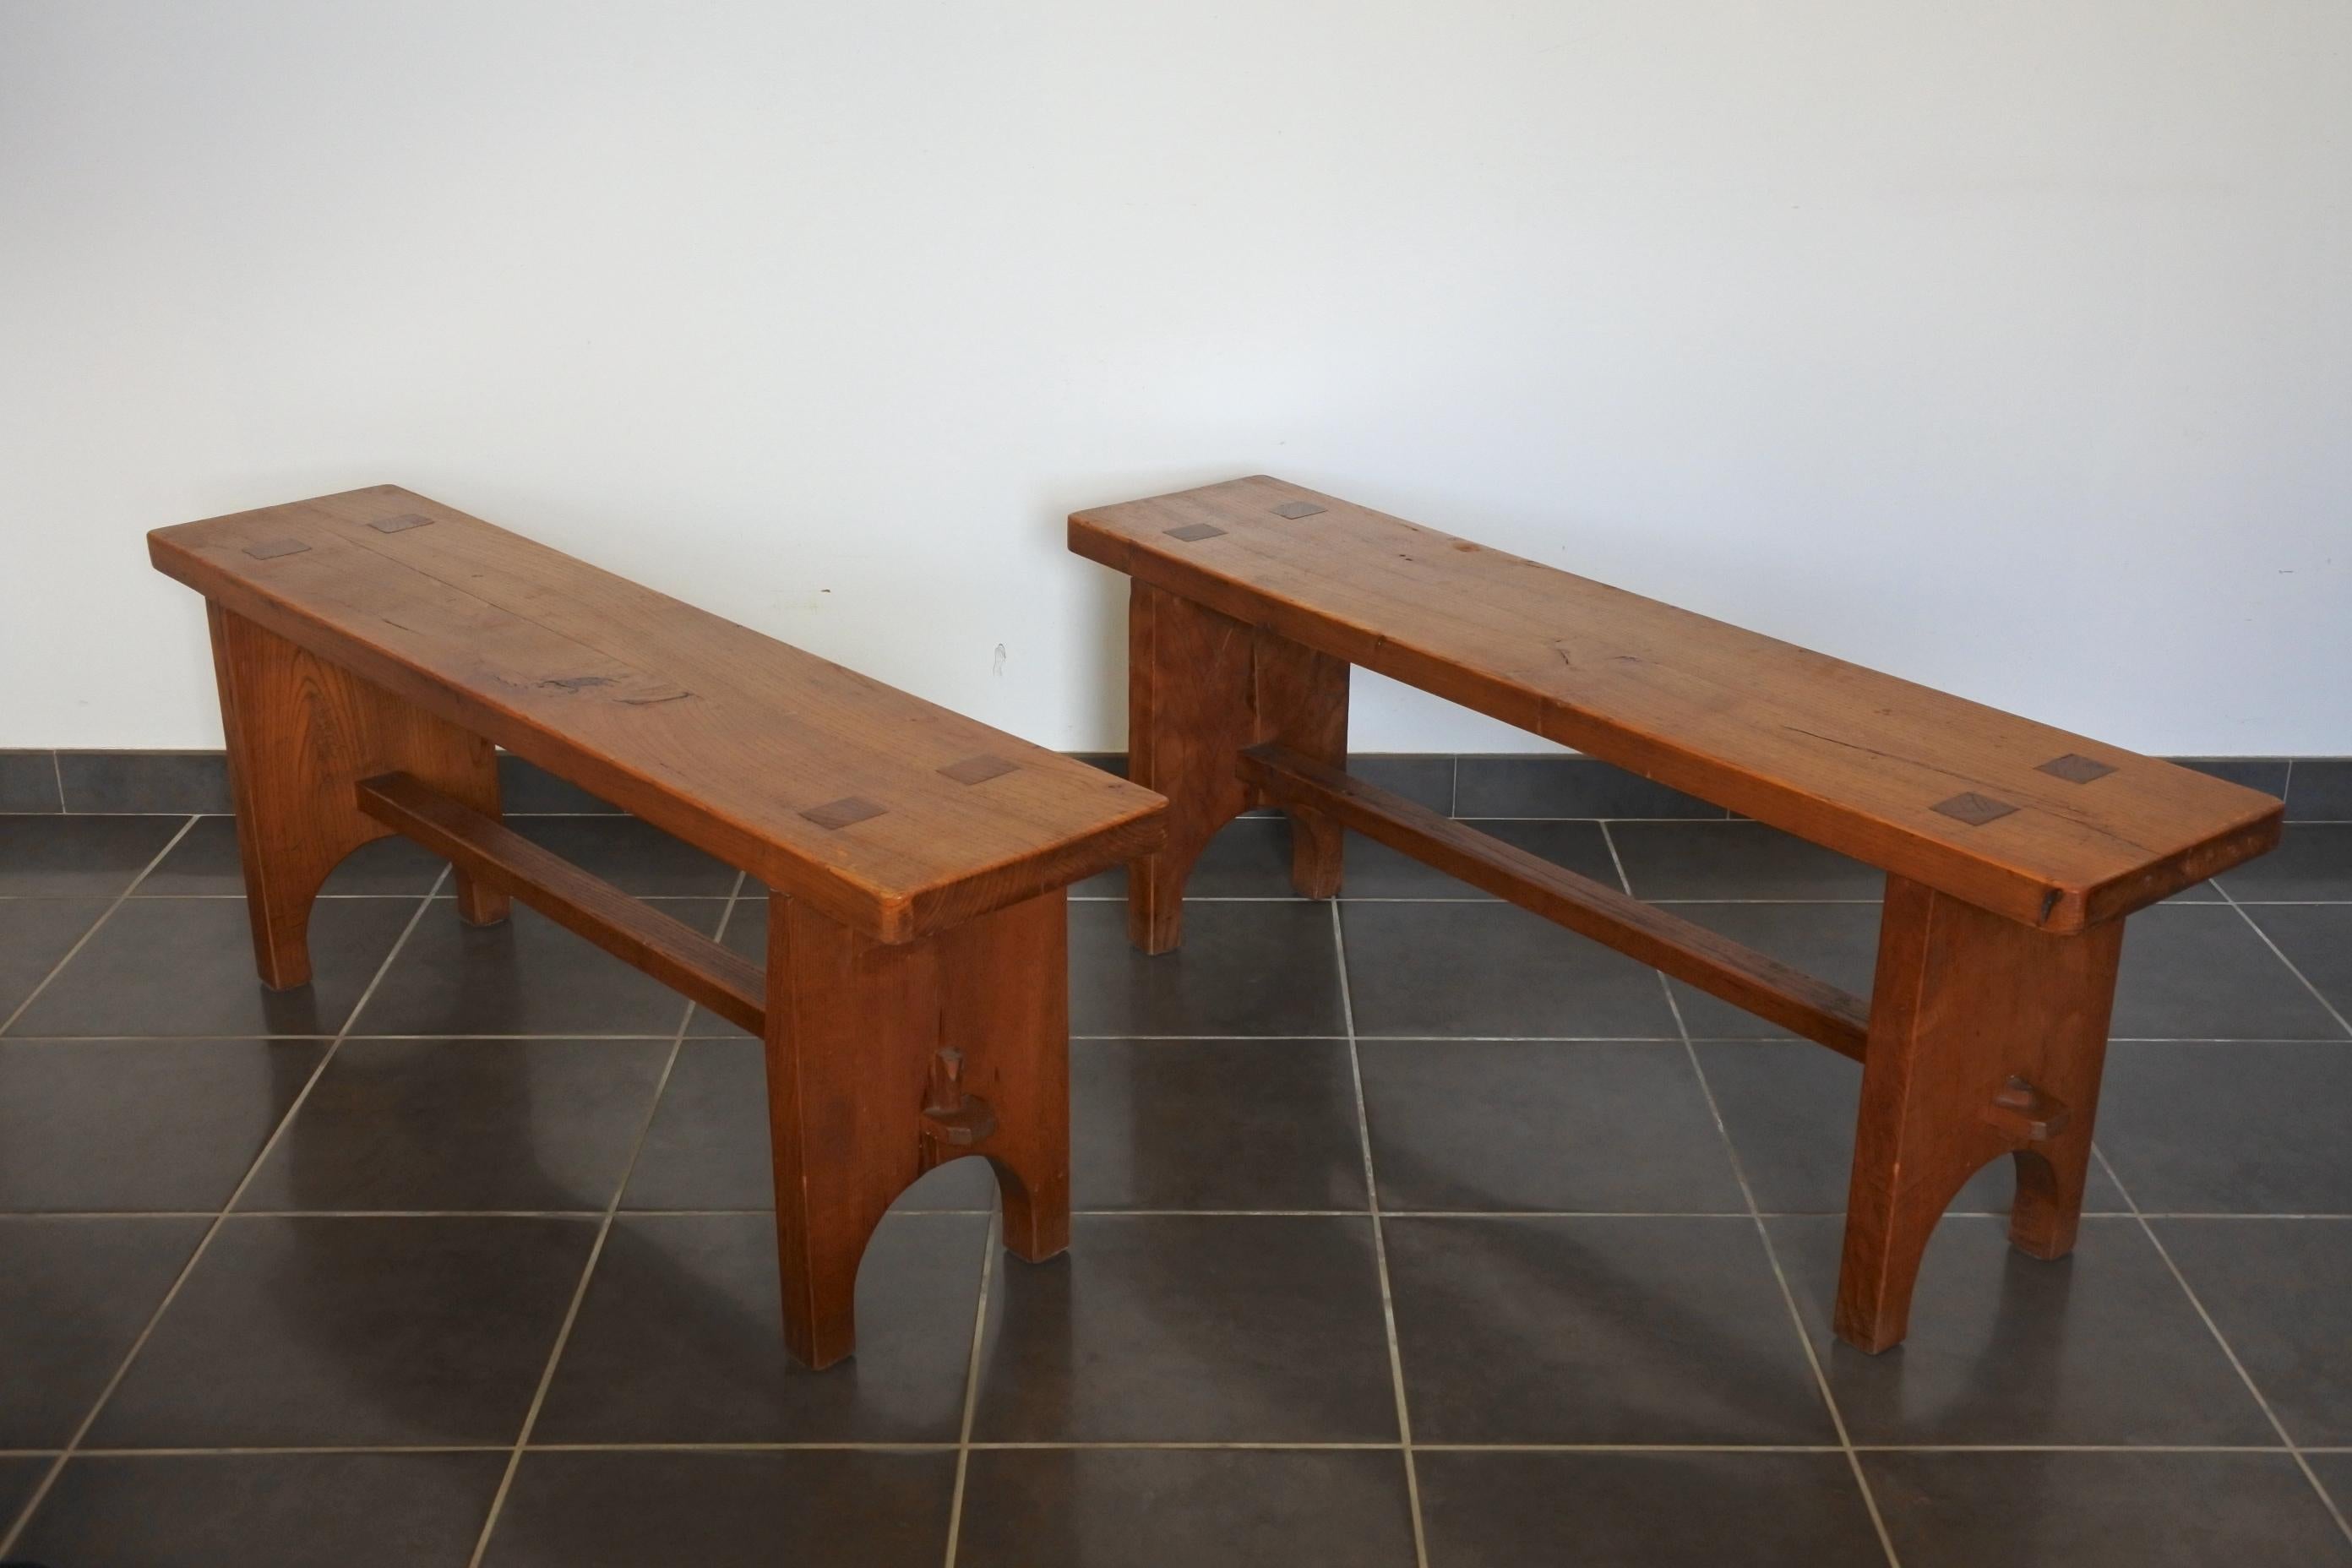 Handmade studio bench from a French woodworker.
Solid chestnut wood.
Made in the center of France (Lozere) in the 1970s.
Great patina, grain and craftsmanship.
2 available.
Ideal for a kitchen or even an entryway.